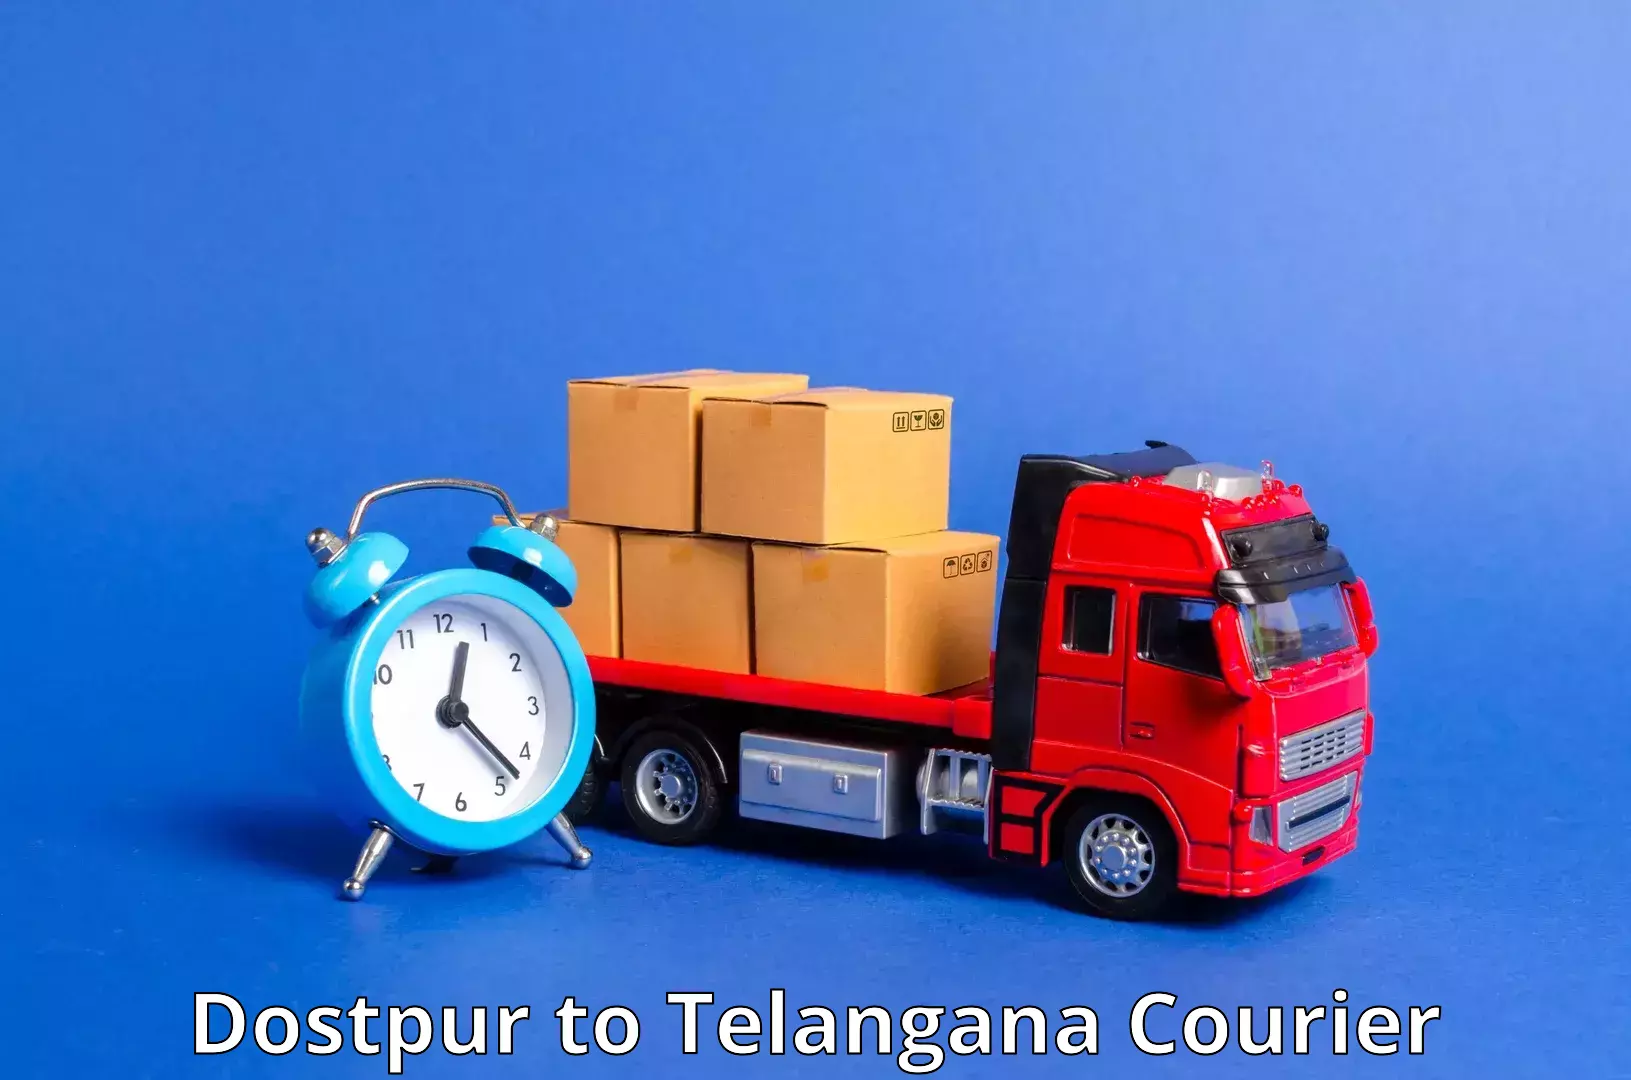 Flexible delivery scheduling Dostpur to Mahabubnagar